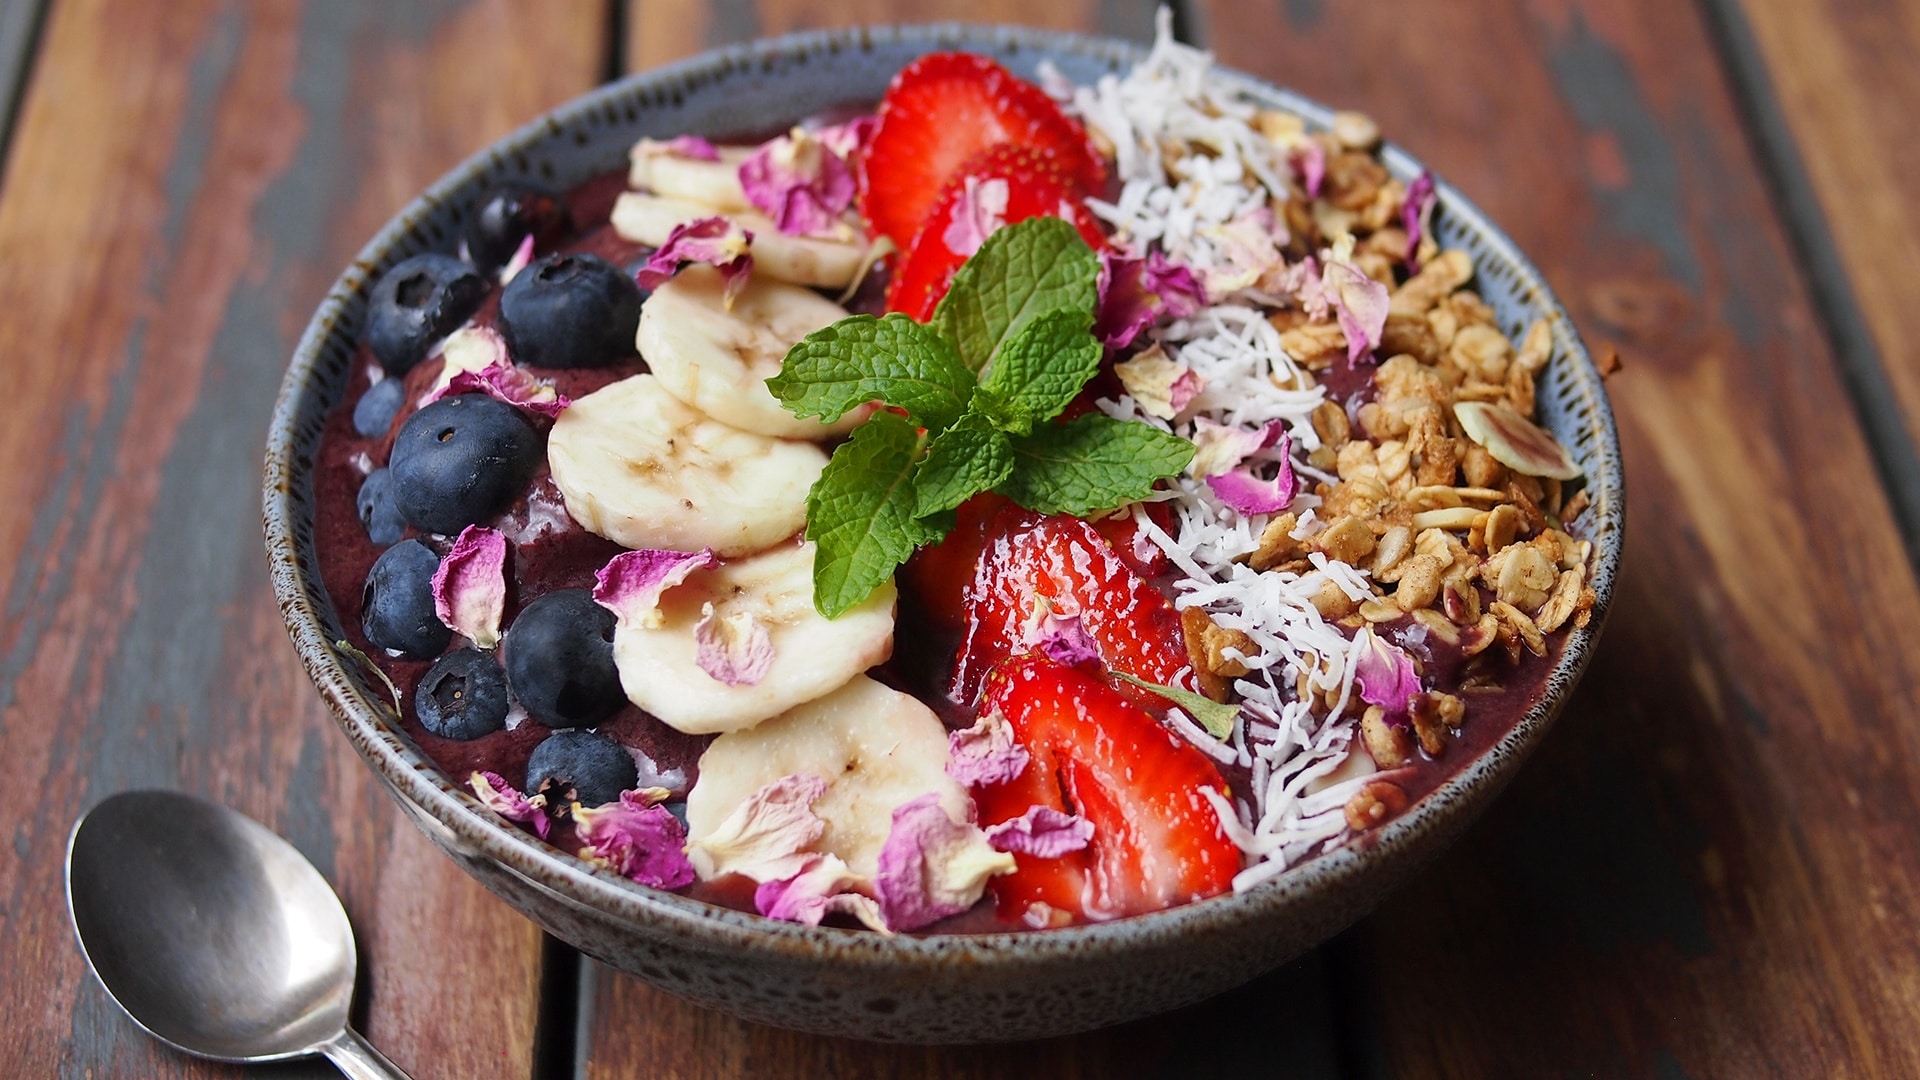 Picture of an acai bowl, topped with strawberries, bananas and blueberries